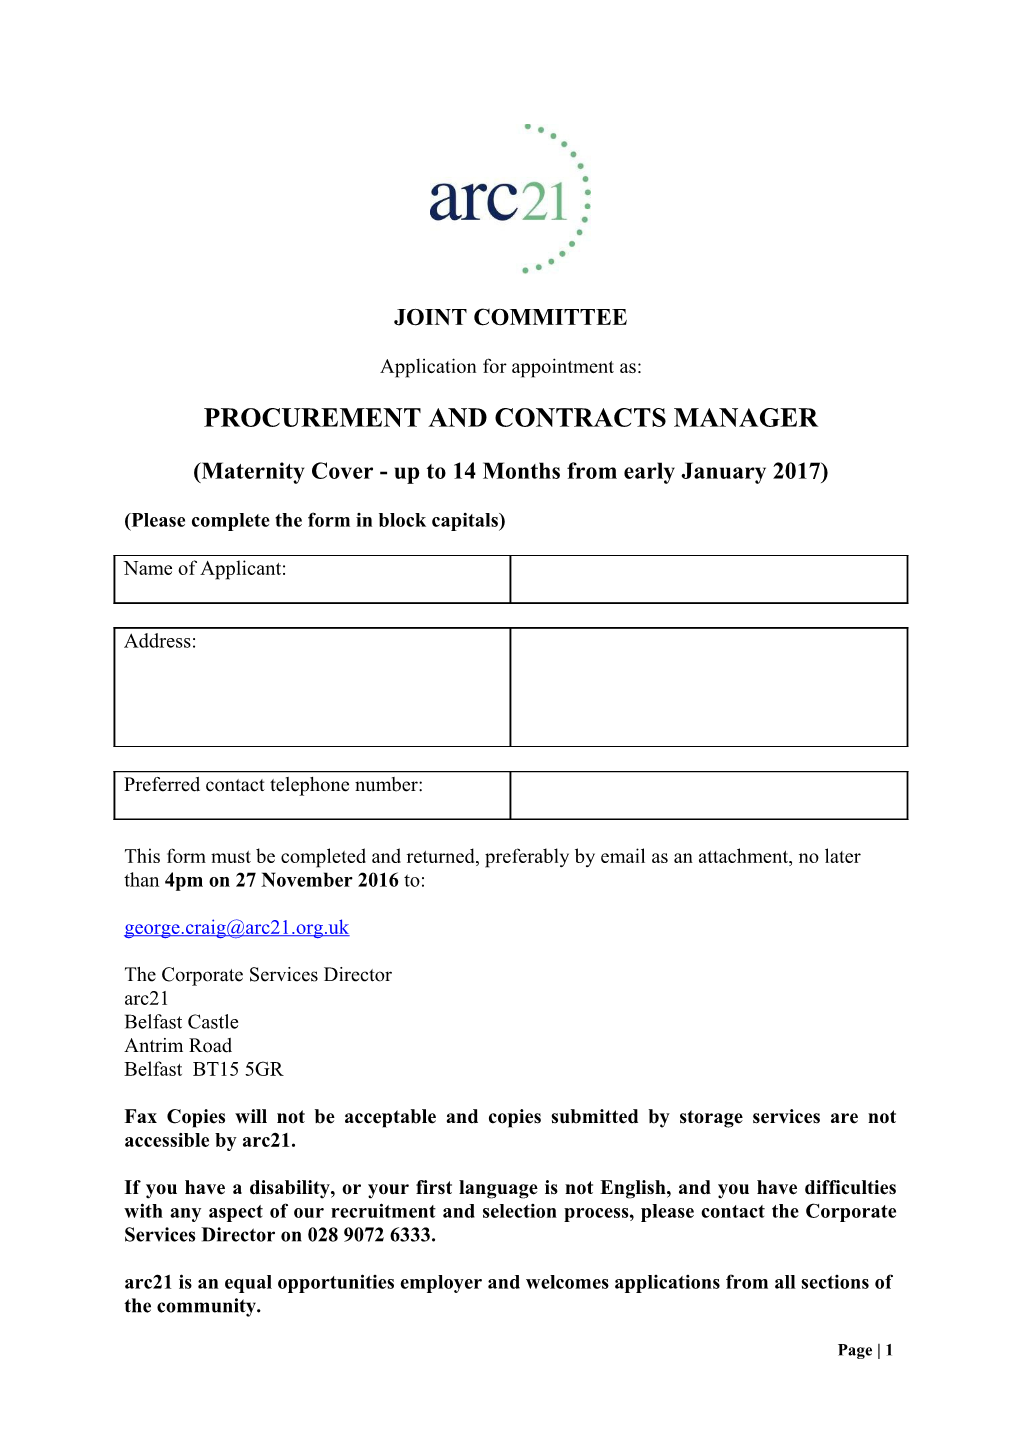 Procurement and Contracts Manager